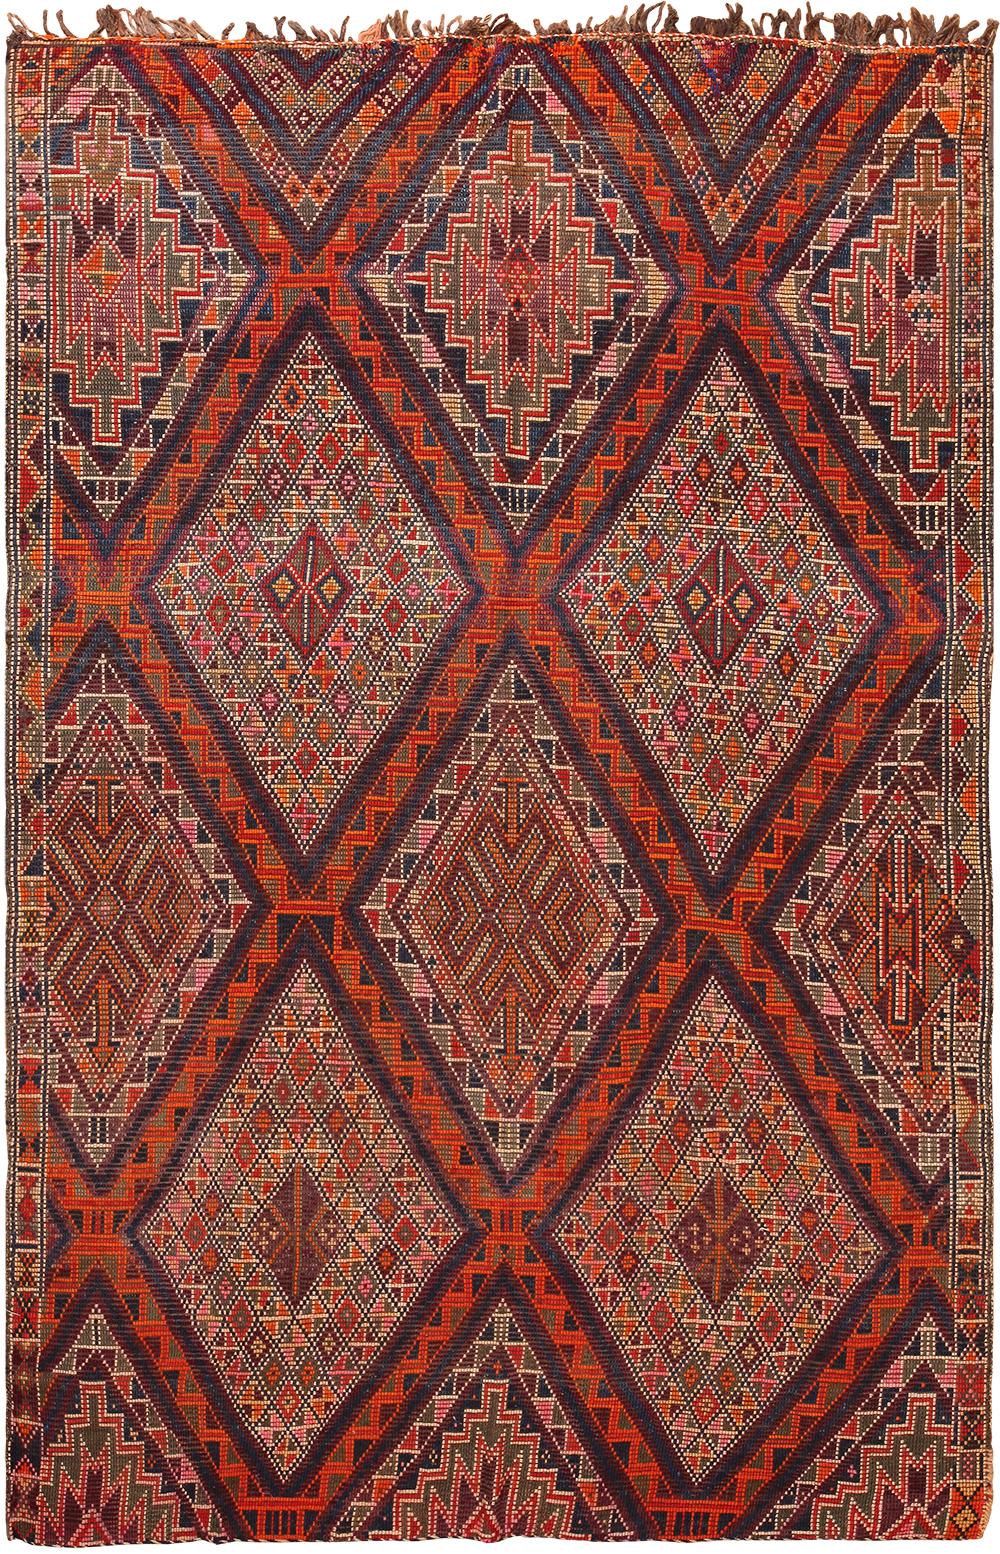 Beautiful Folk Art vintage geometric Moroccan rug, country of origin: Morocco, date circa mid-20th century. Size: 6 ft. 4 in x 9 ft. 9 in (1.93 m x 2.97 m).